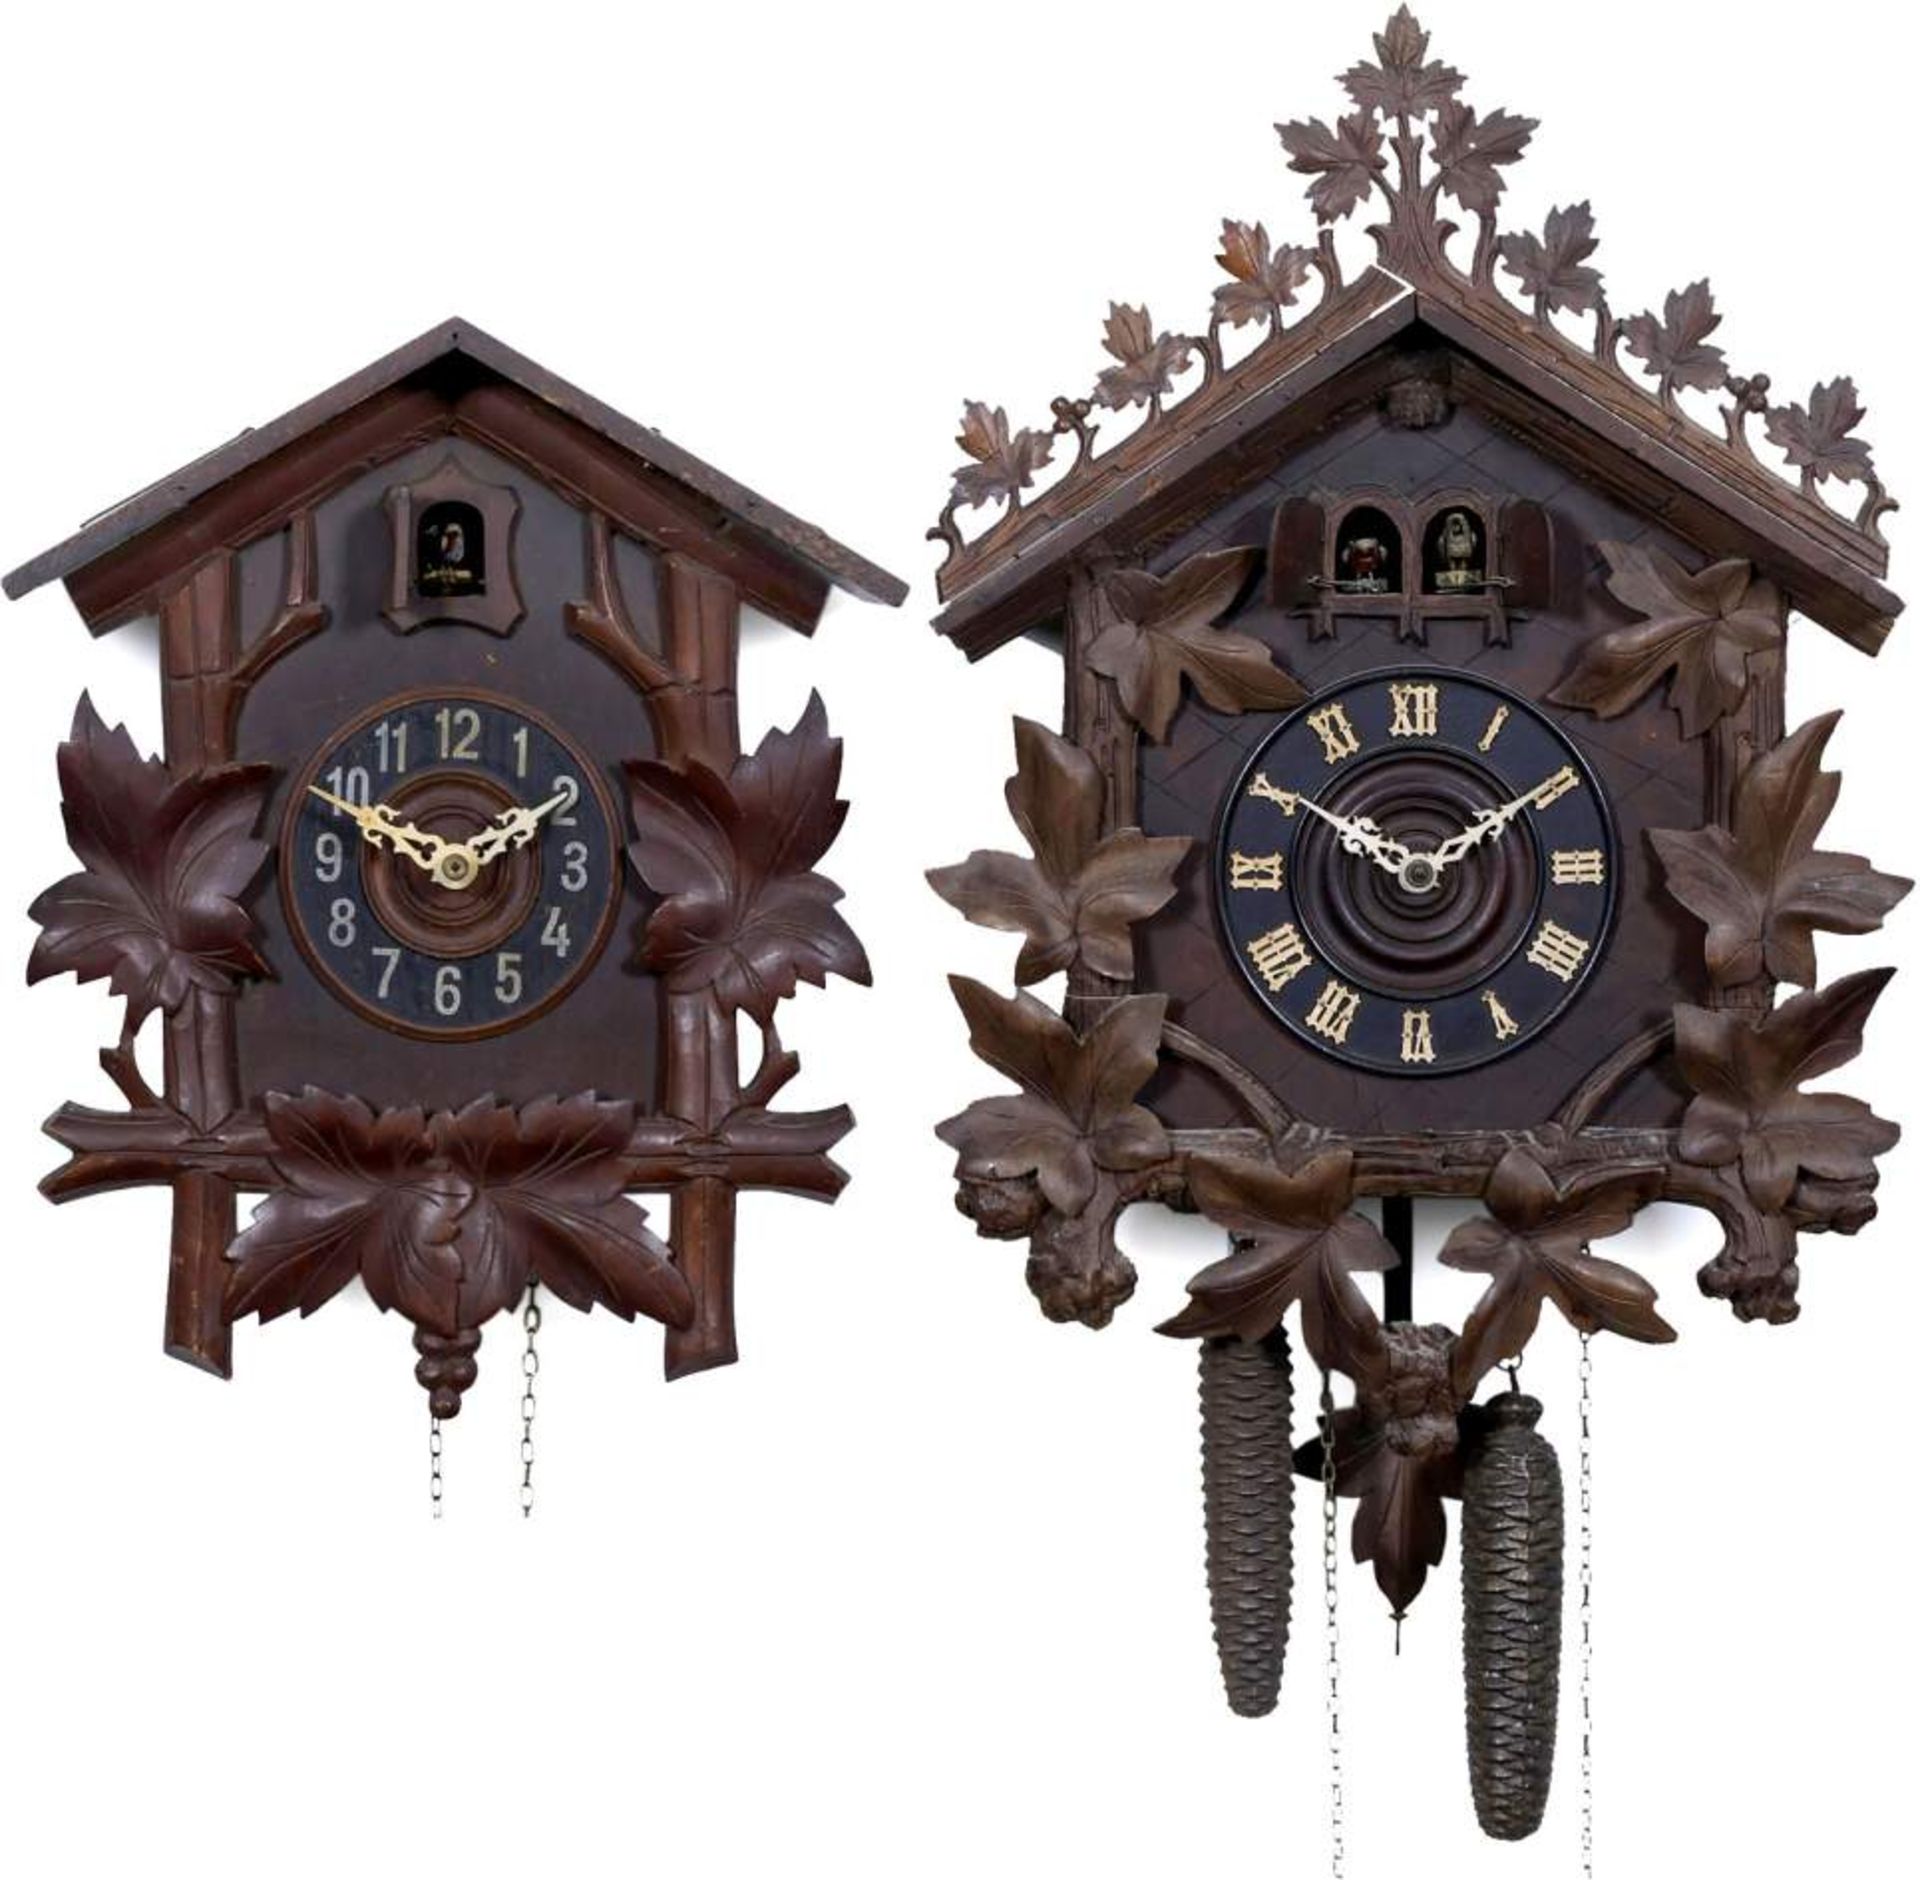 2 Black Forest Cuckoo Clocks, c. 1900
1) Large clock with cuckoo and quail, with 2 pipes each,